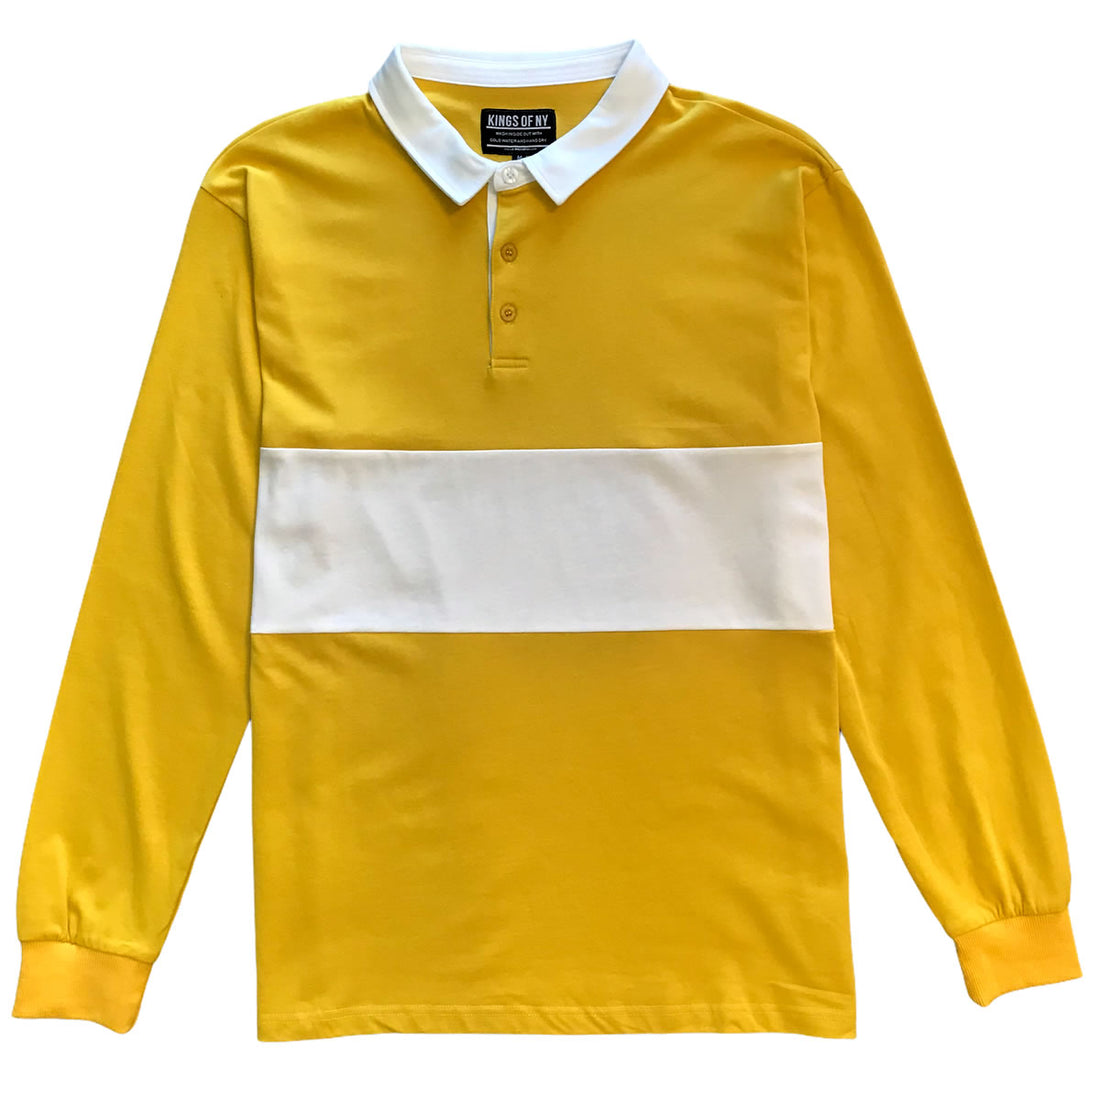 Mens Yellow and White Striped Long Sleeve Polo Rugby Shirt